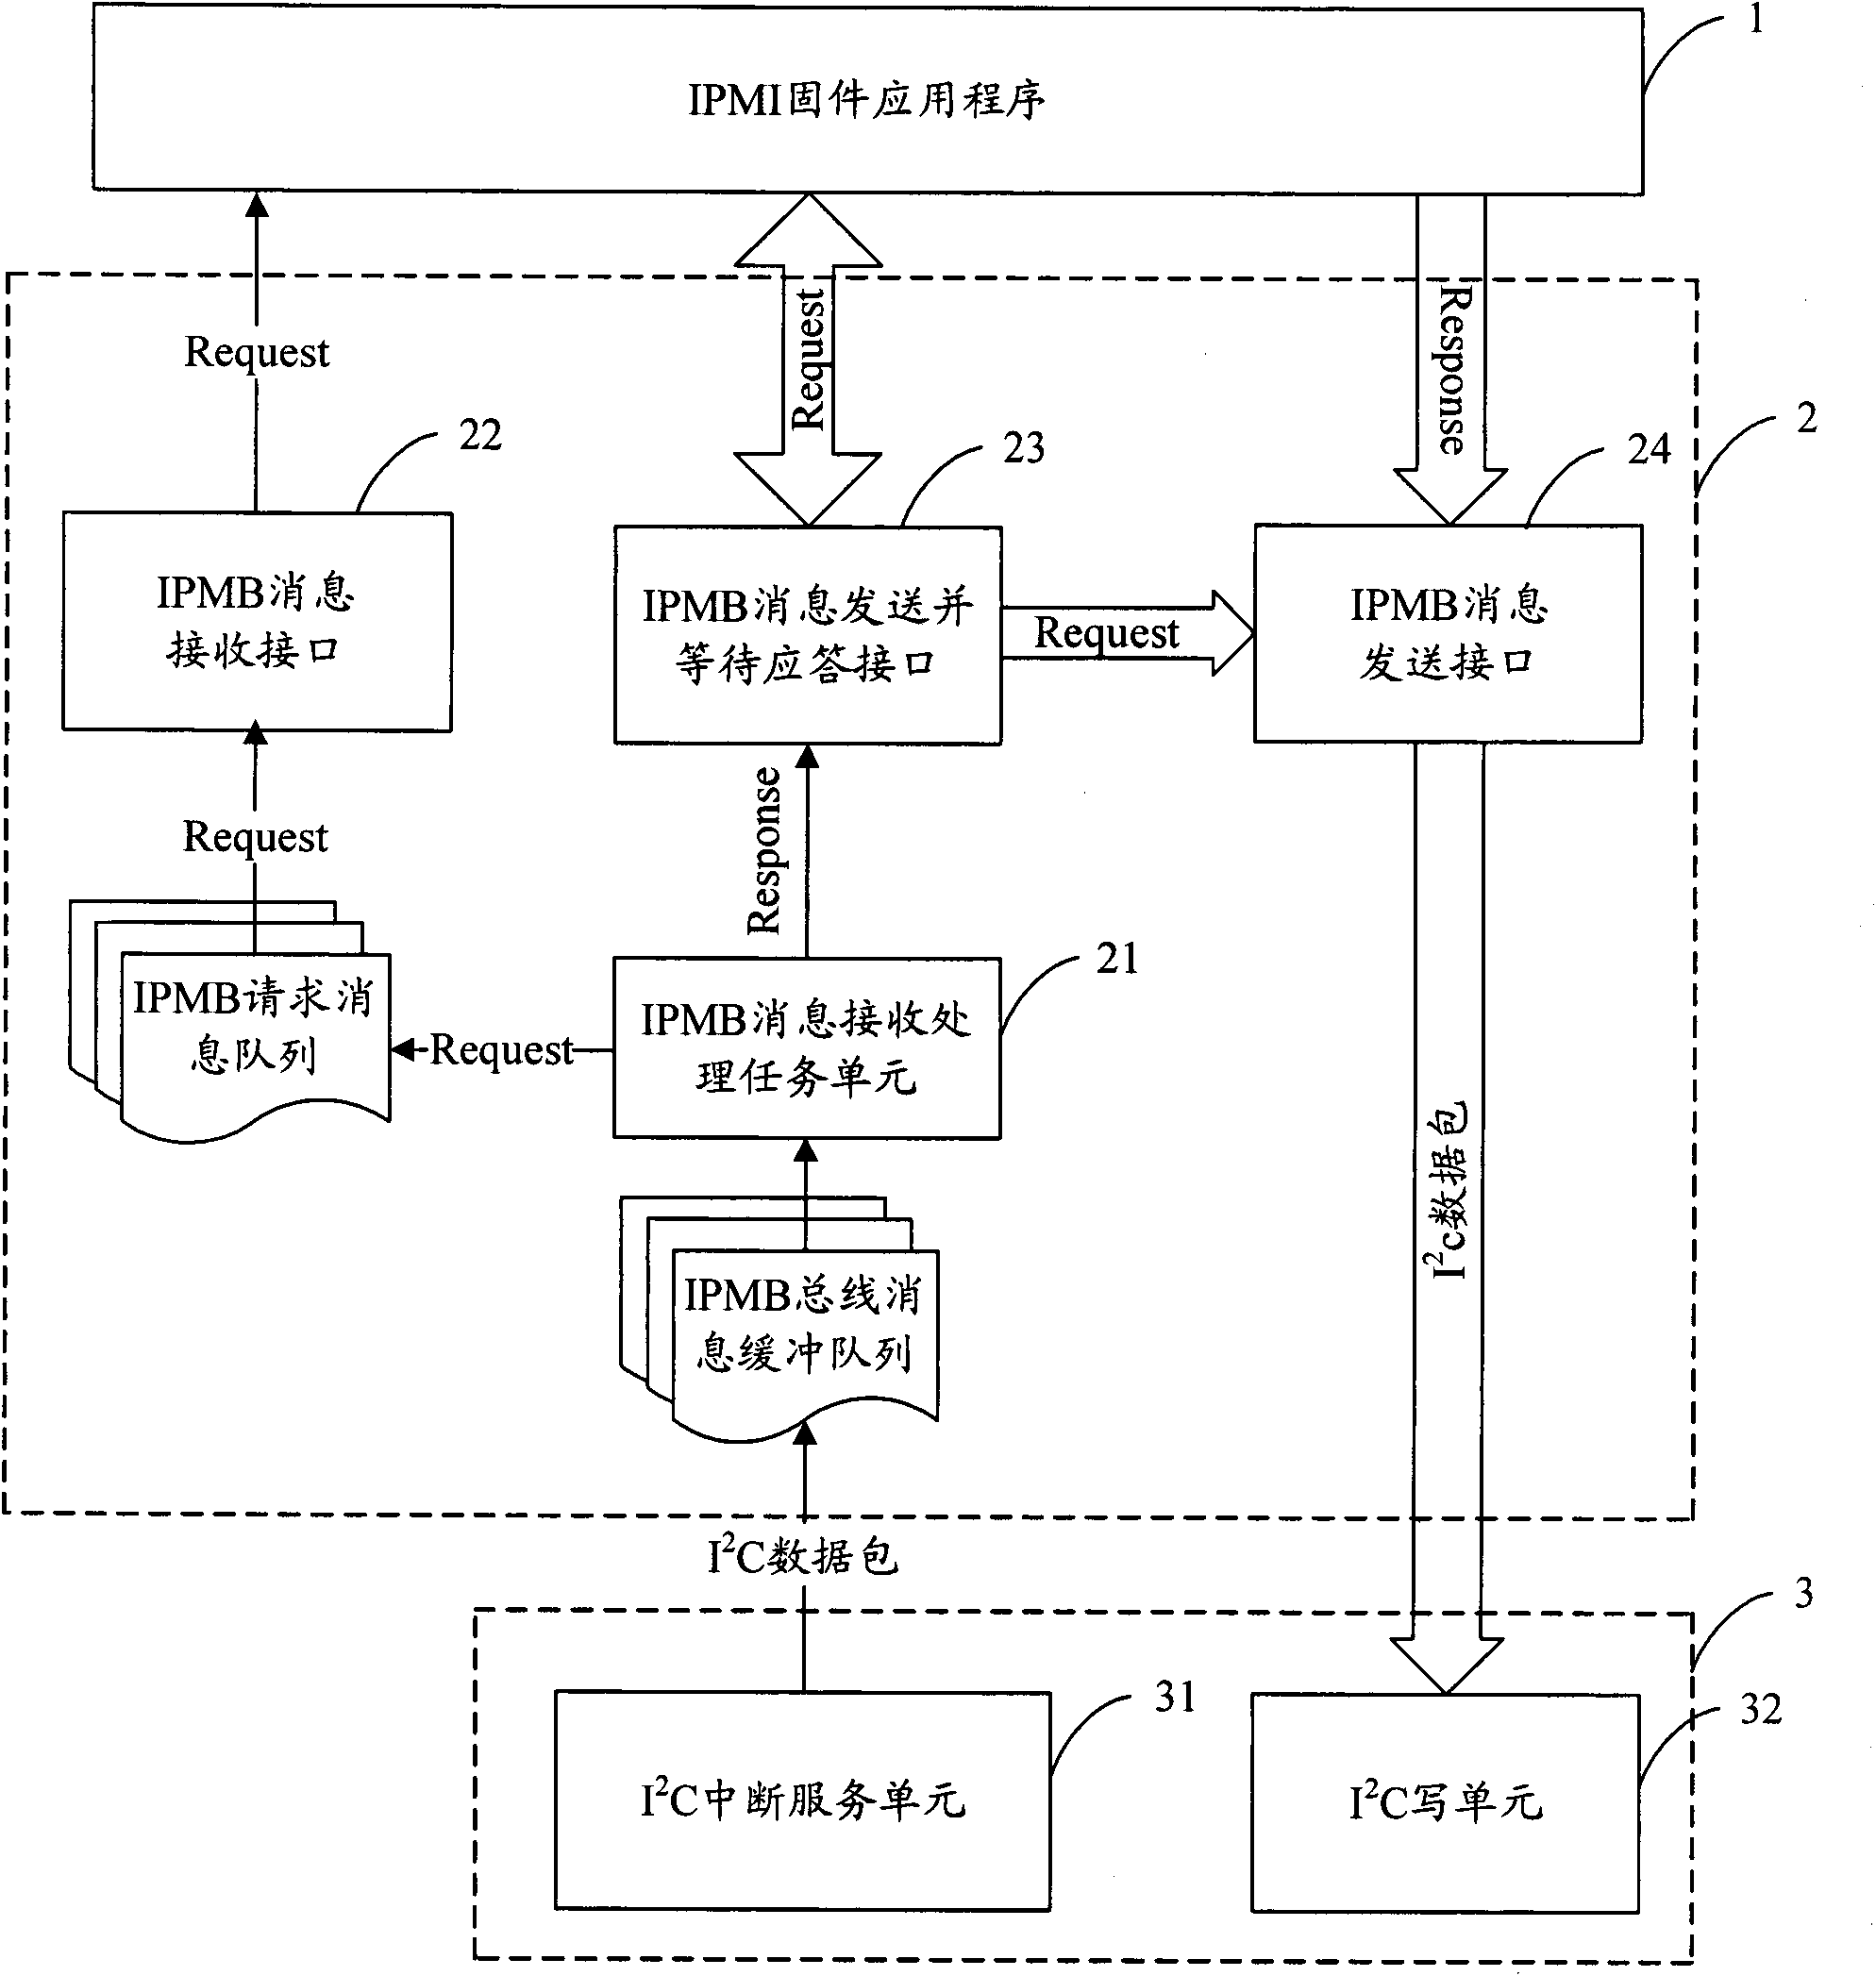 Intelligent platform management interface (IPMI) message transmission device, system and computer equipment